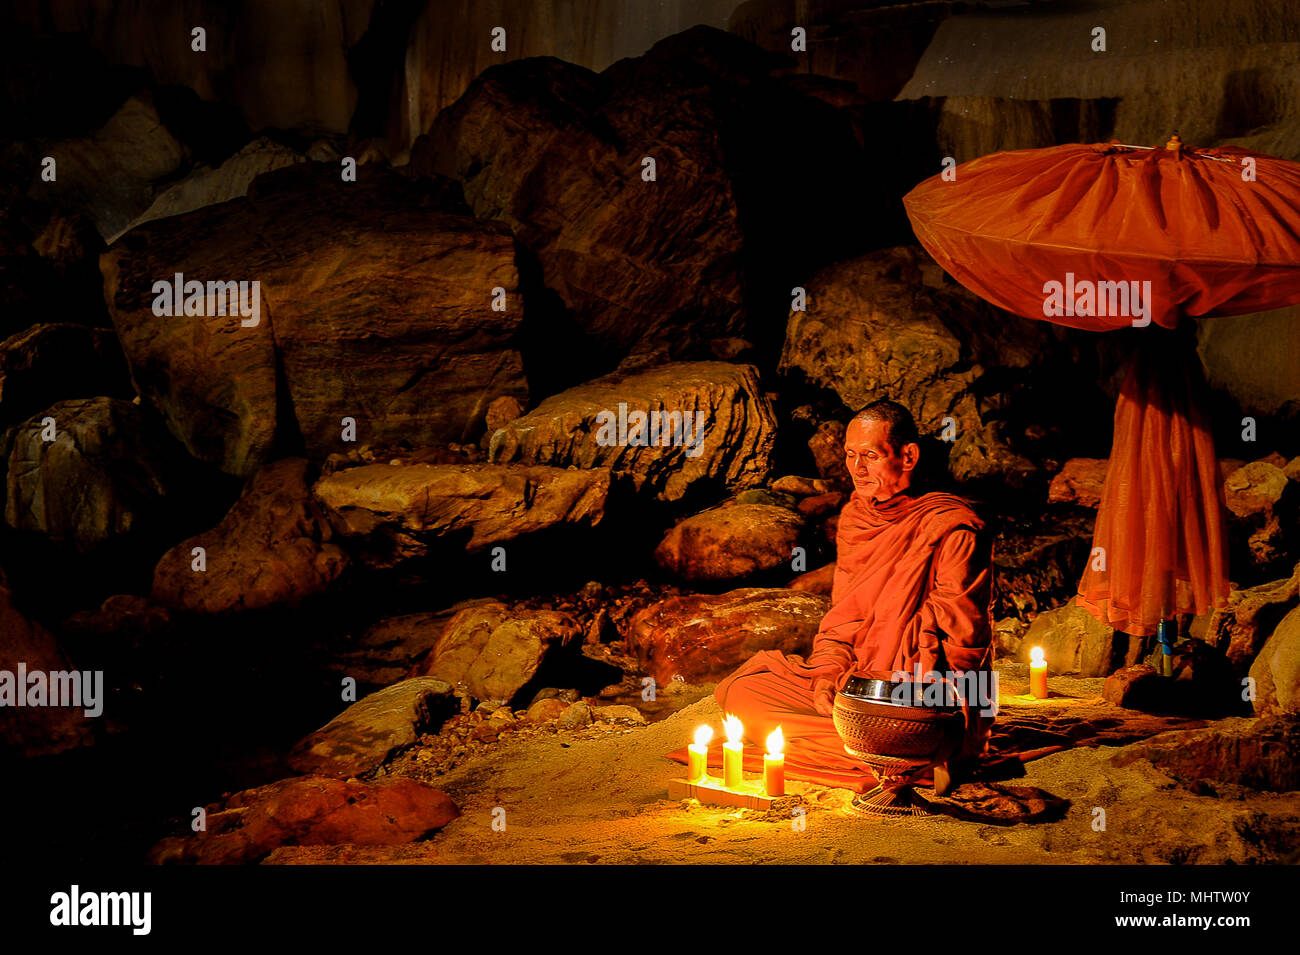 Kanchanaburi, Thailand - July 15, 2011: Buddhist monk sitting with alms bowl, lighten candle and long-handles umbrella to do individual meditation in  Stock Photo